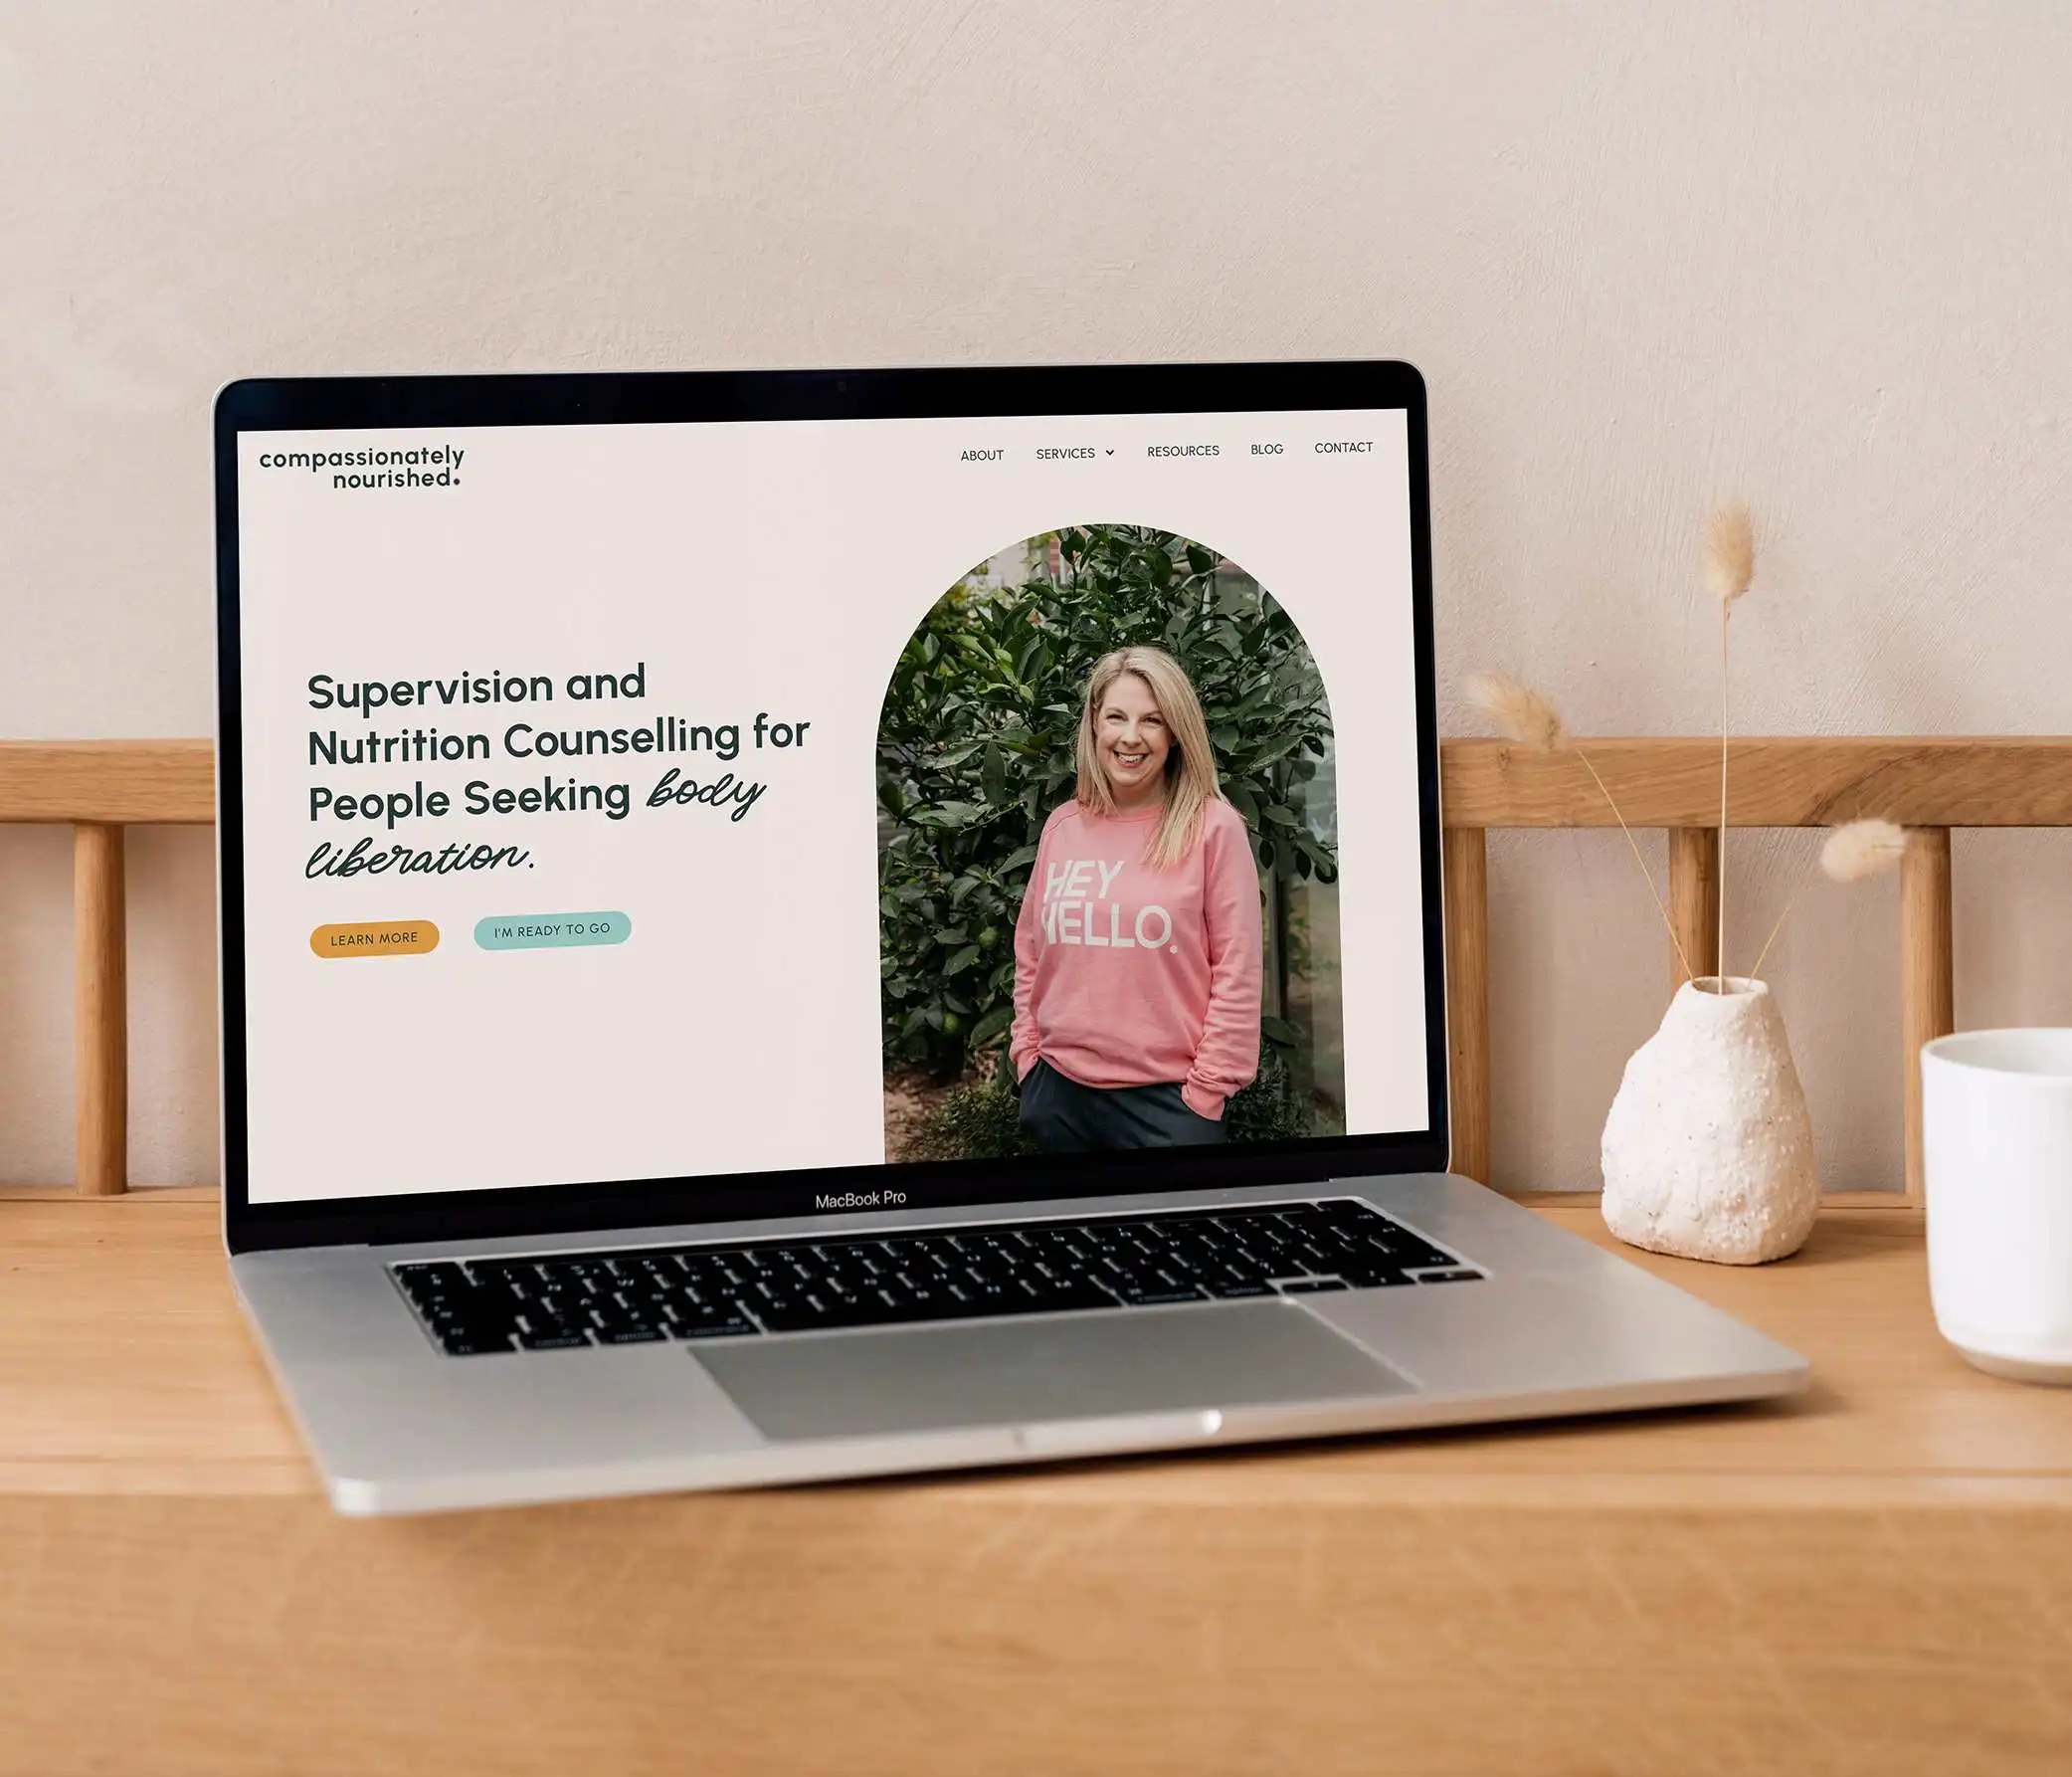 A mockup of the Compassionately Nourished SEO, copywriting and website design project.